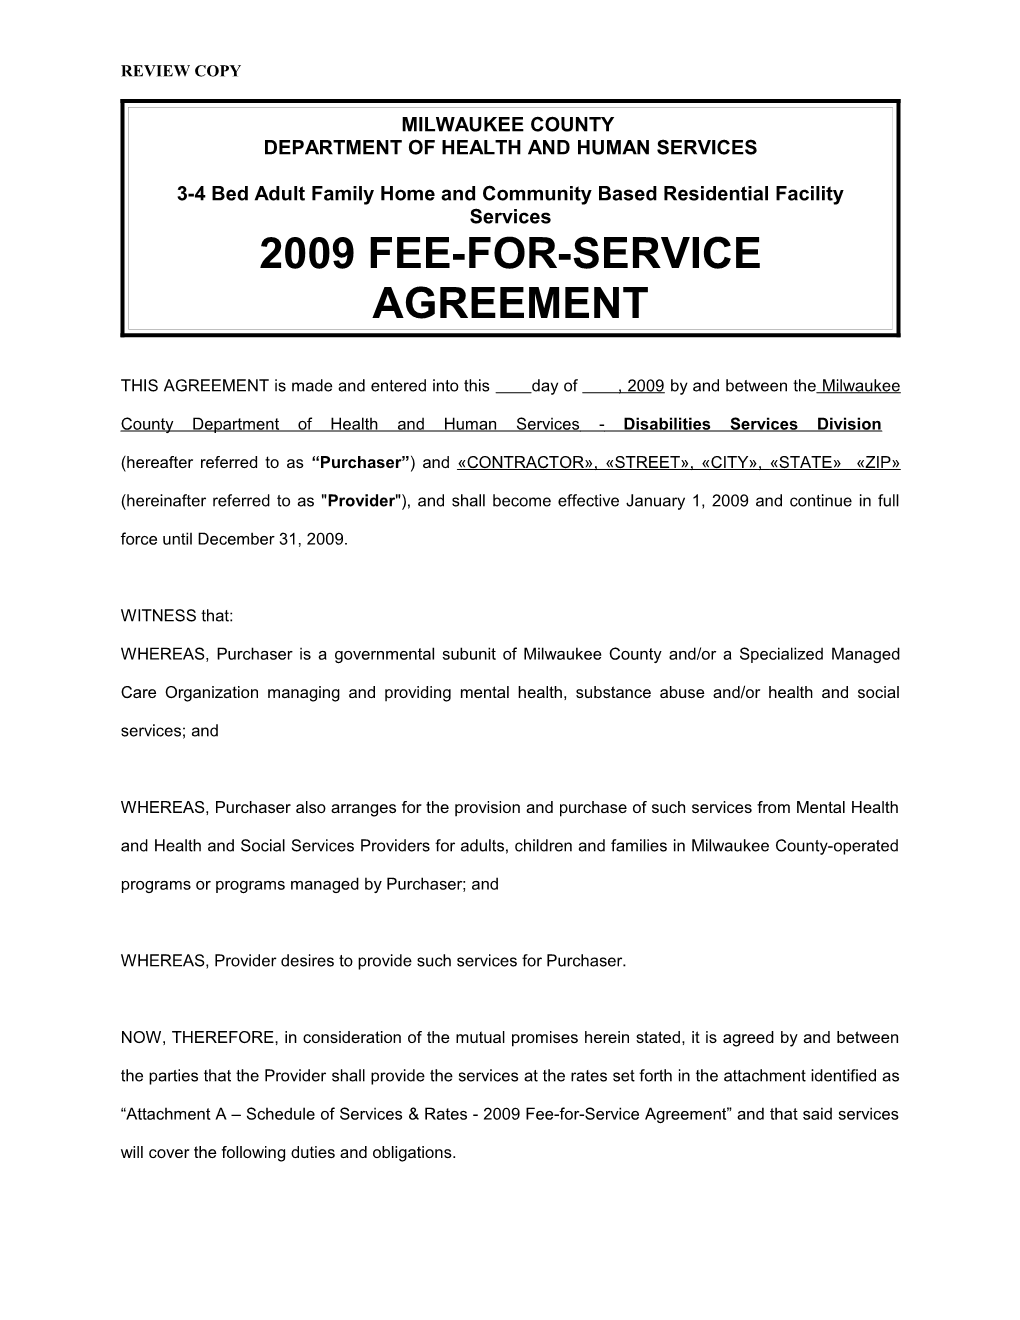 Fee-For-Service